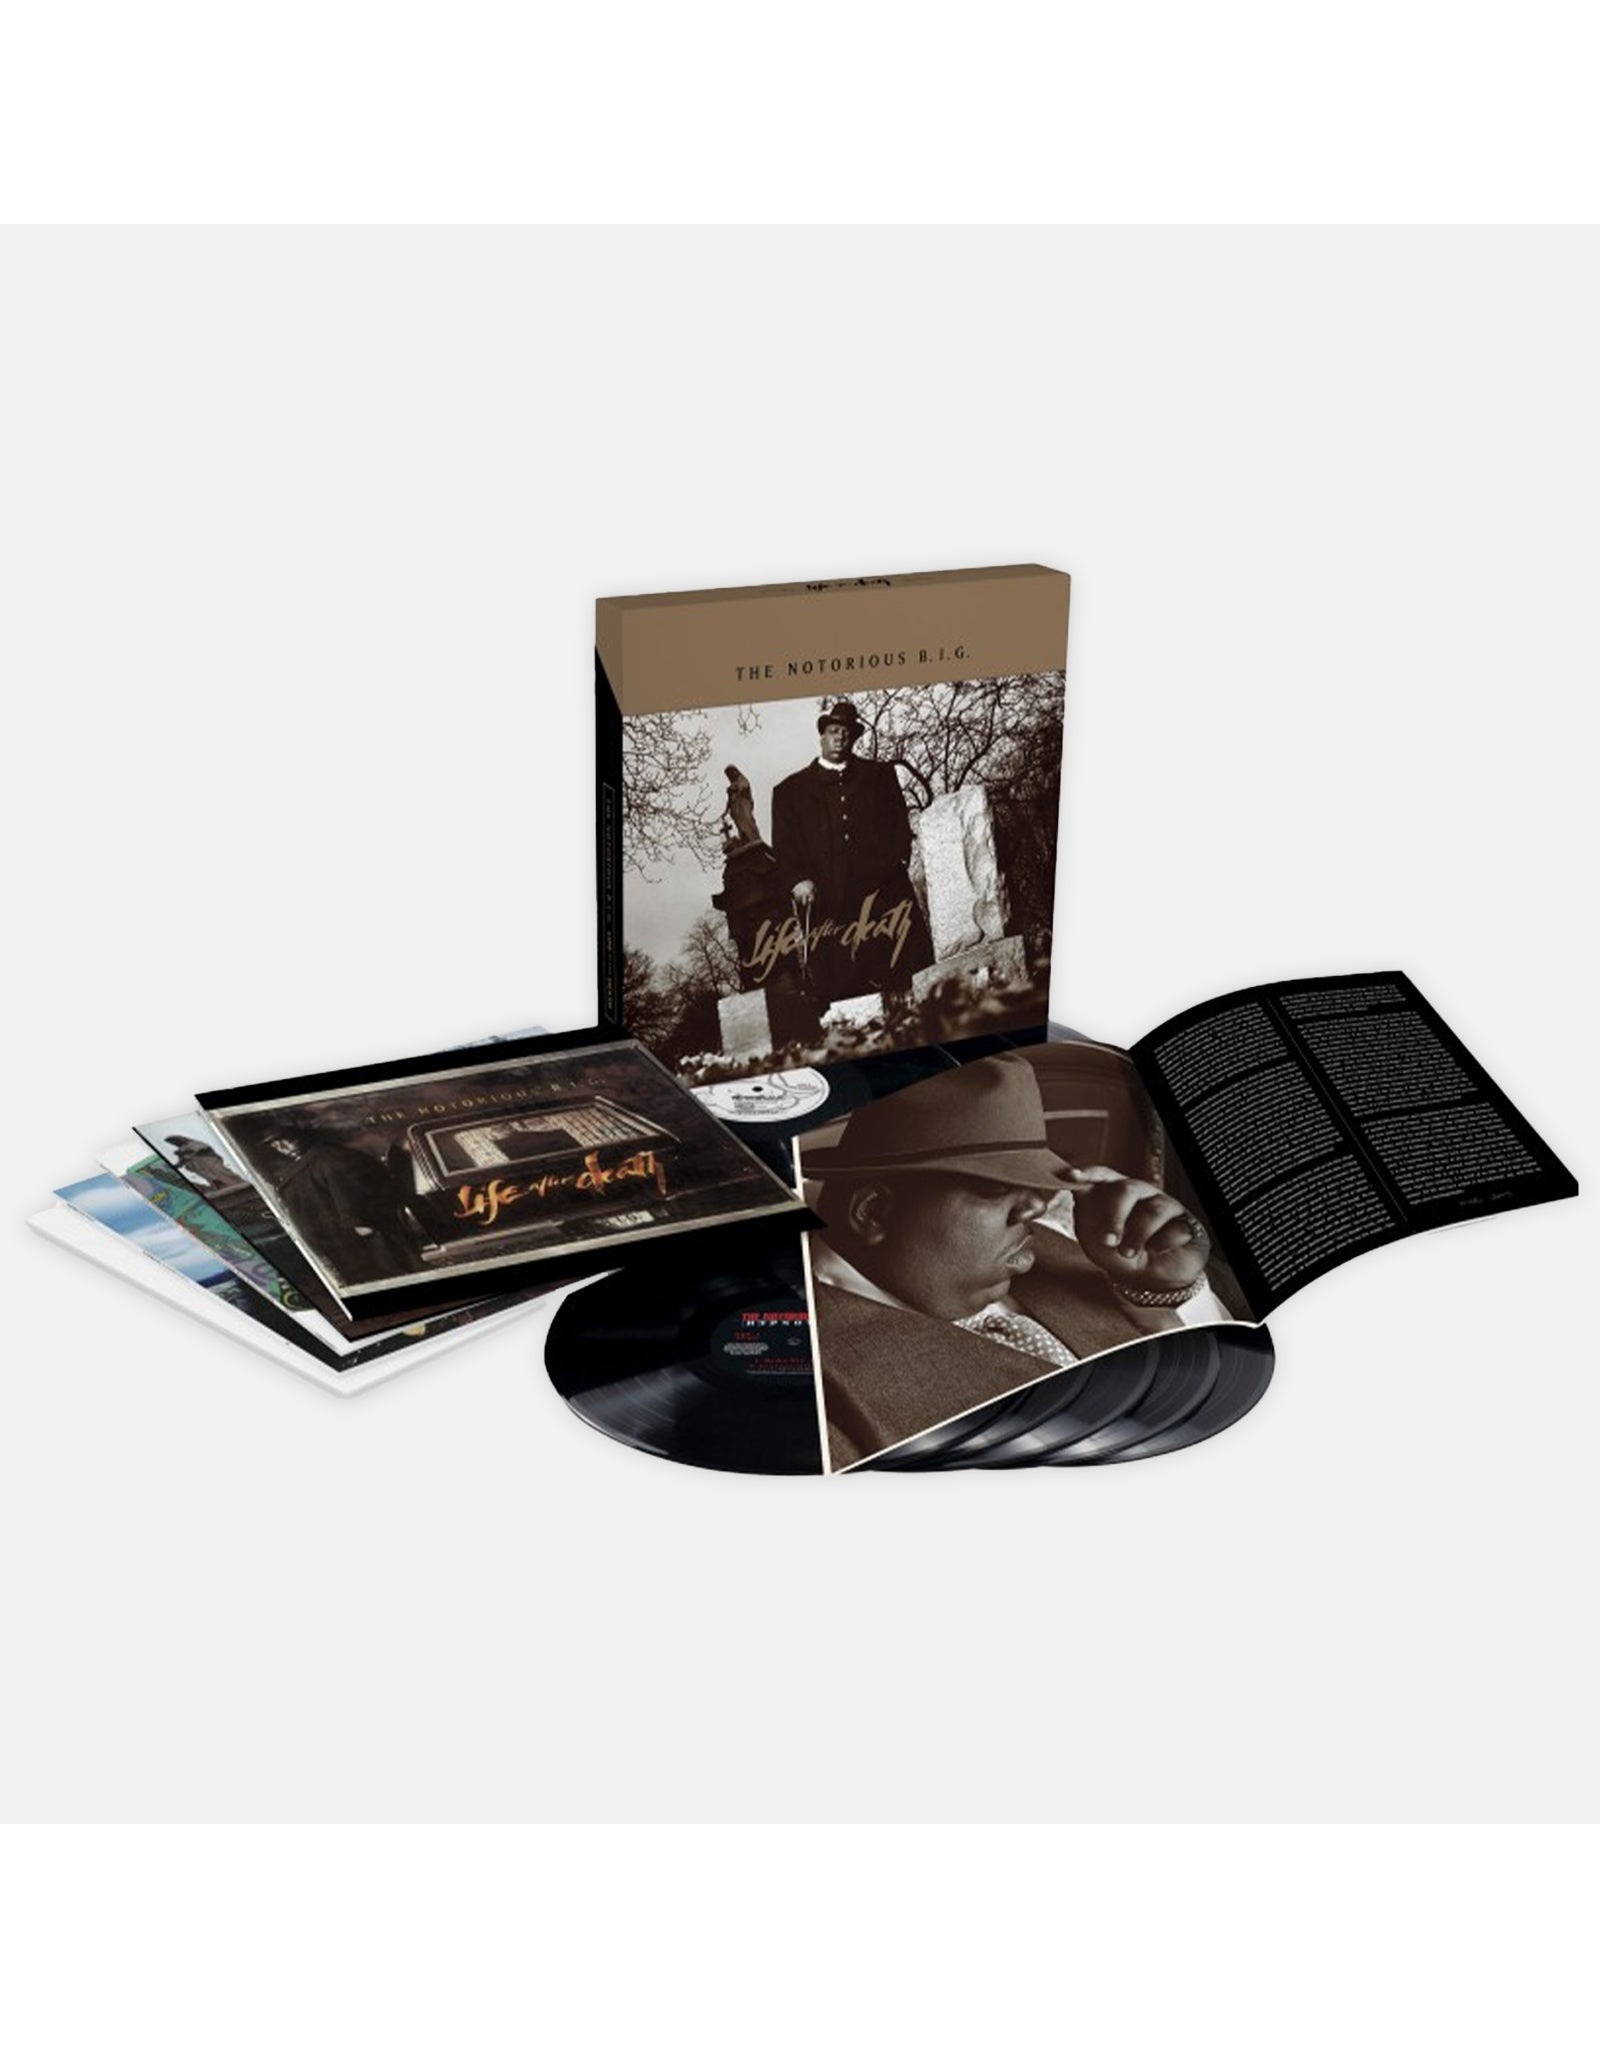 Notorious B.I.G. - Life After Death (25th Anniversary) [Super Deluxe Edition]